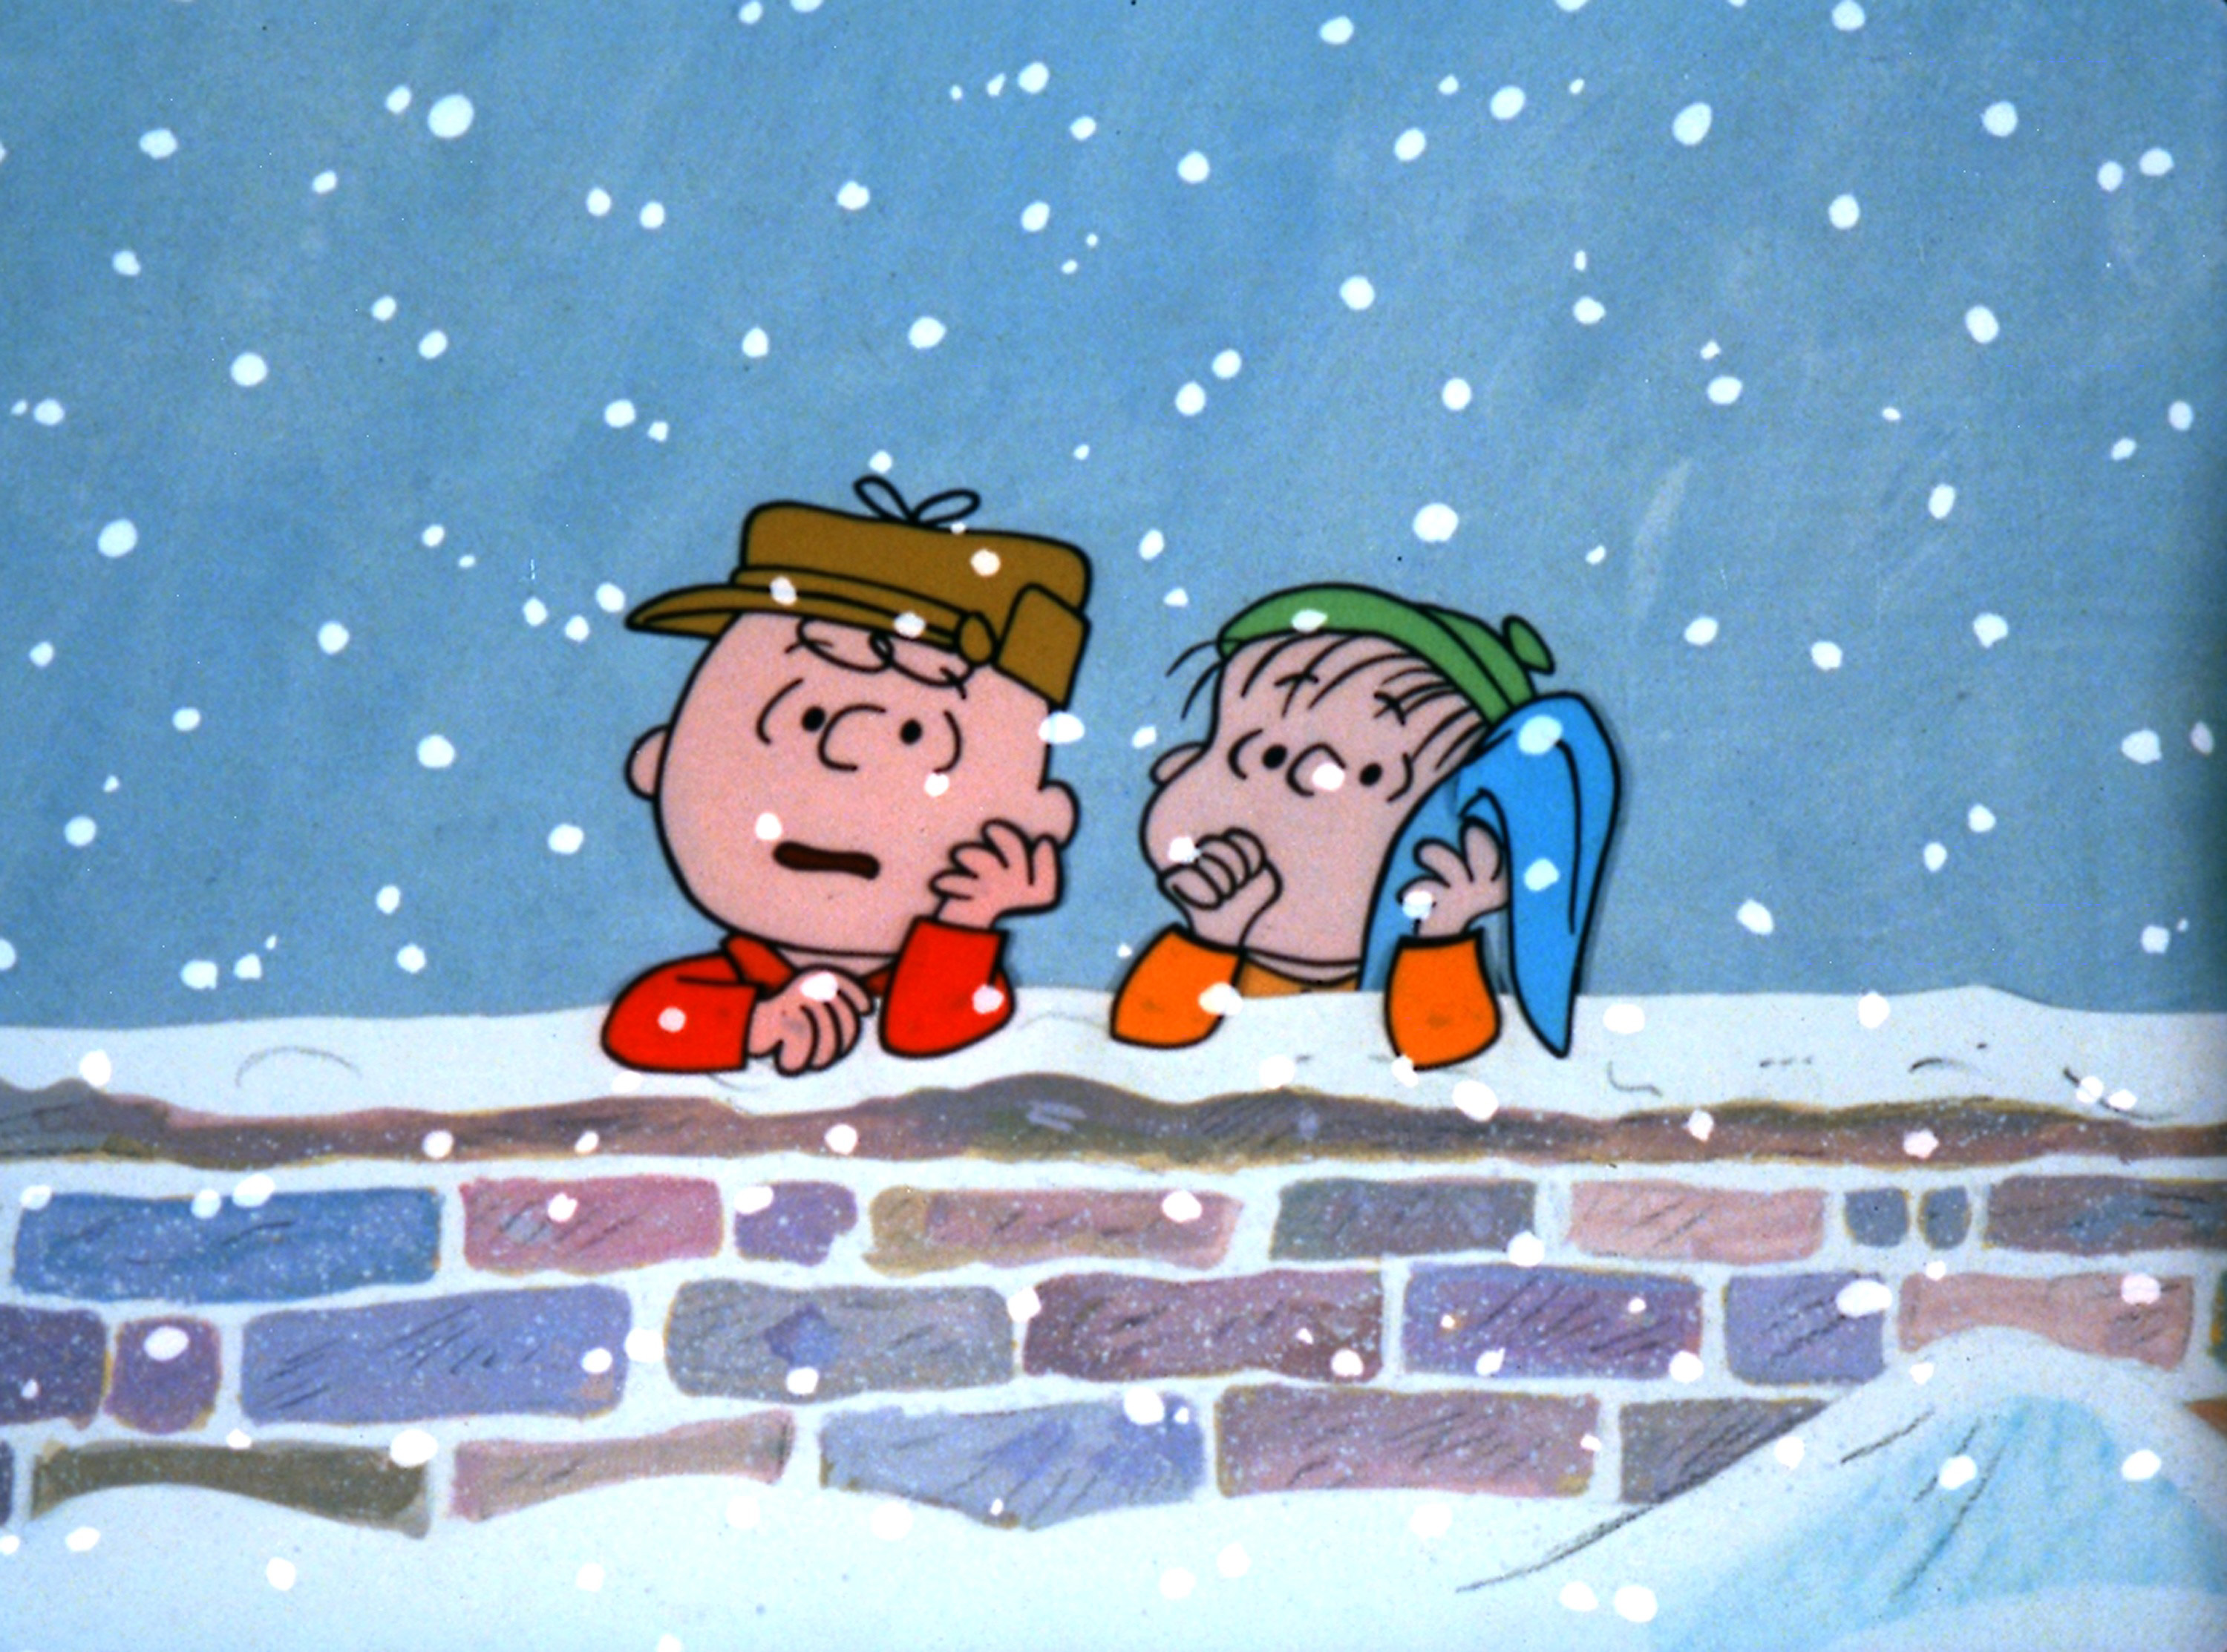 Peter Robbins was the voice of Charlie Brown in the 1965 TV special “A Charlie Brown Christmas.” 